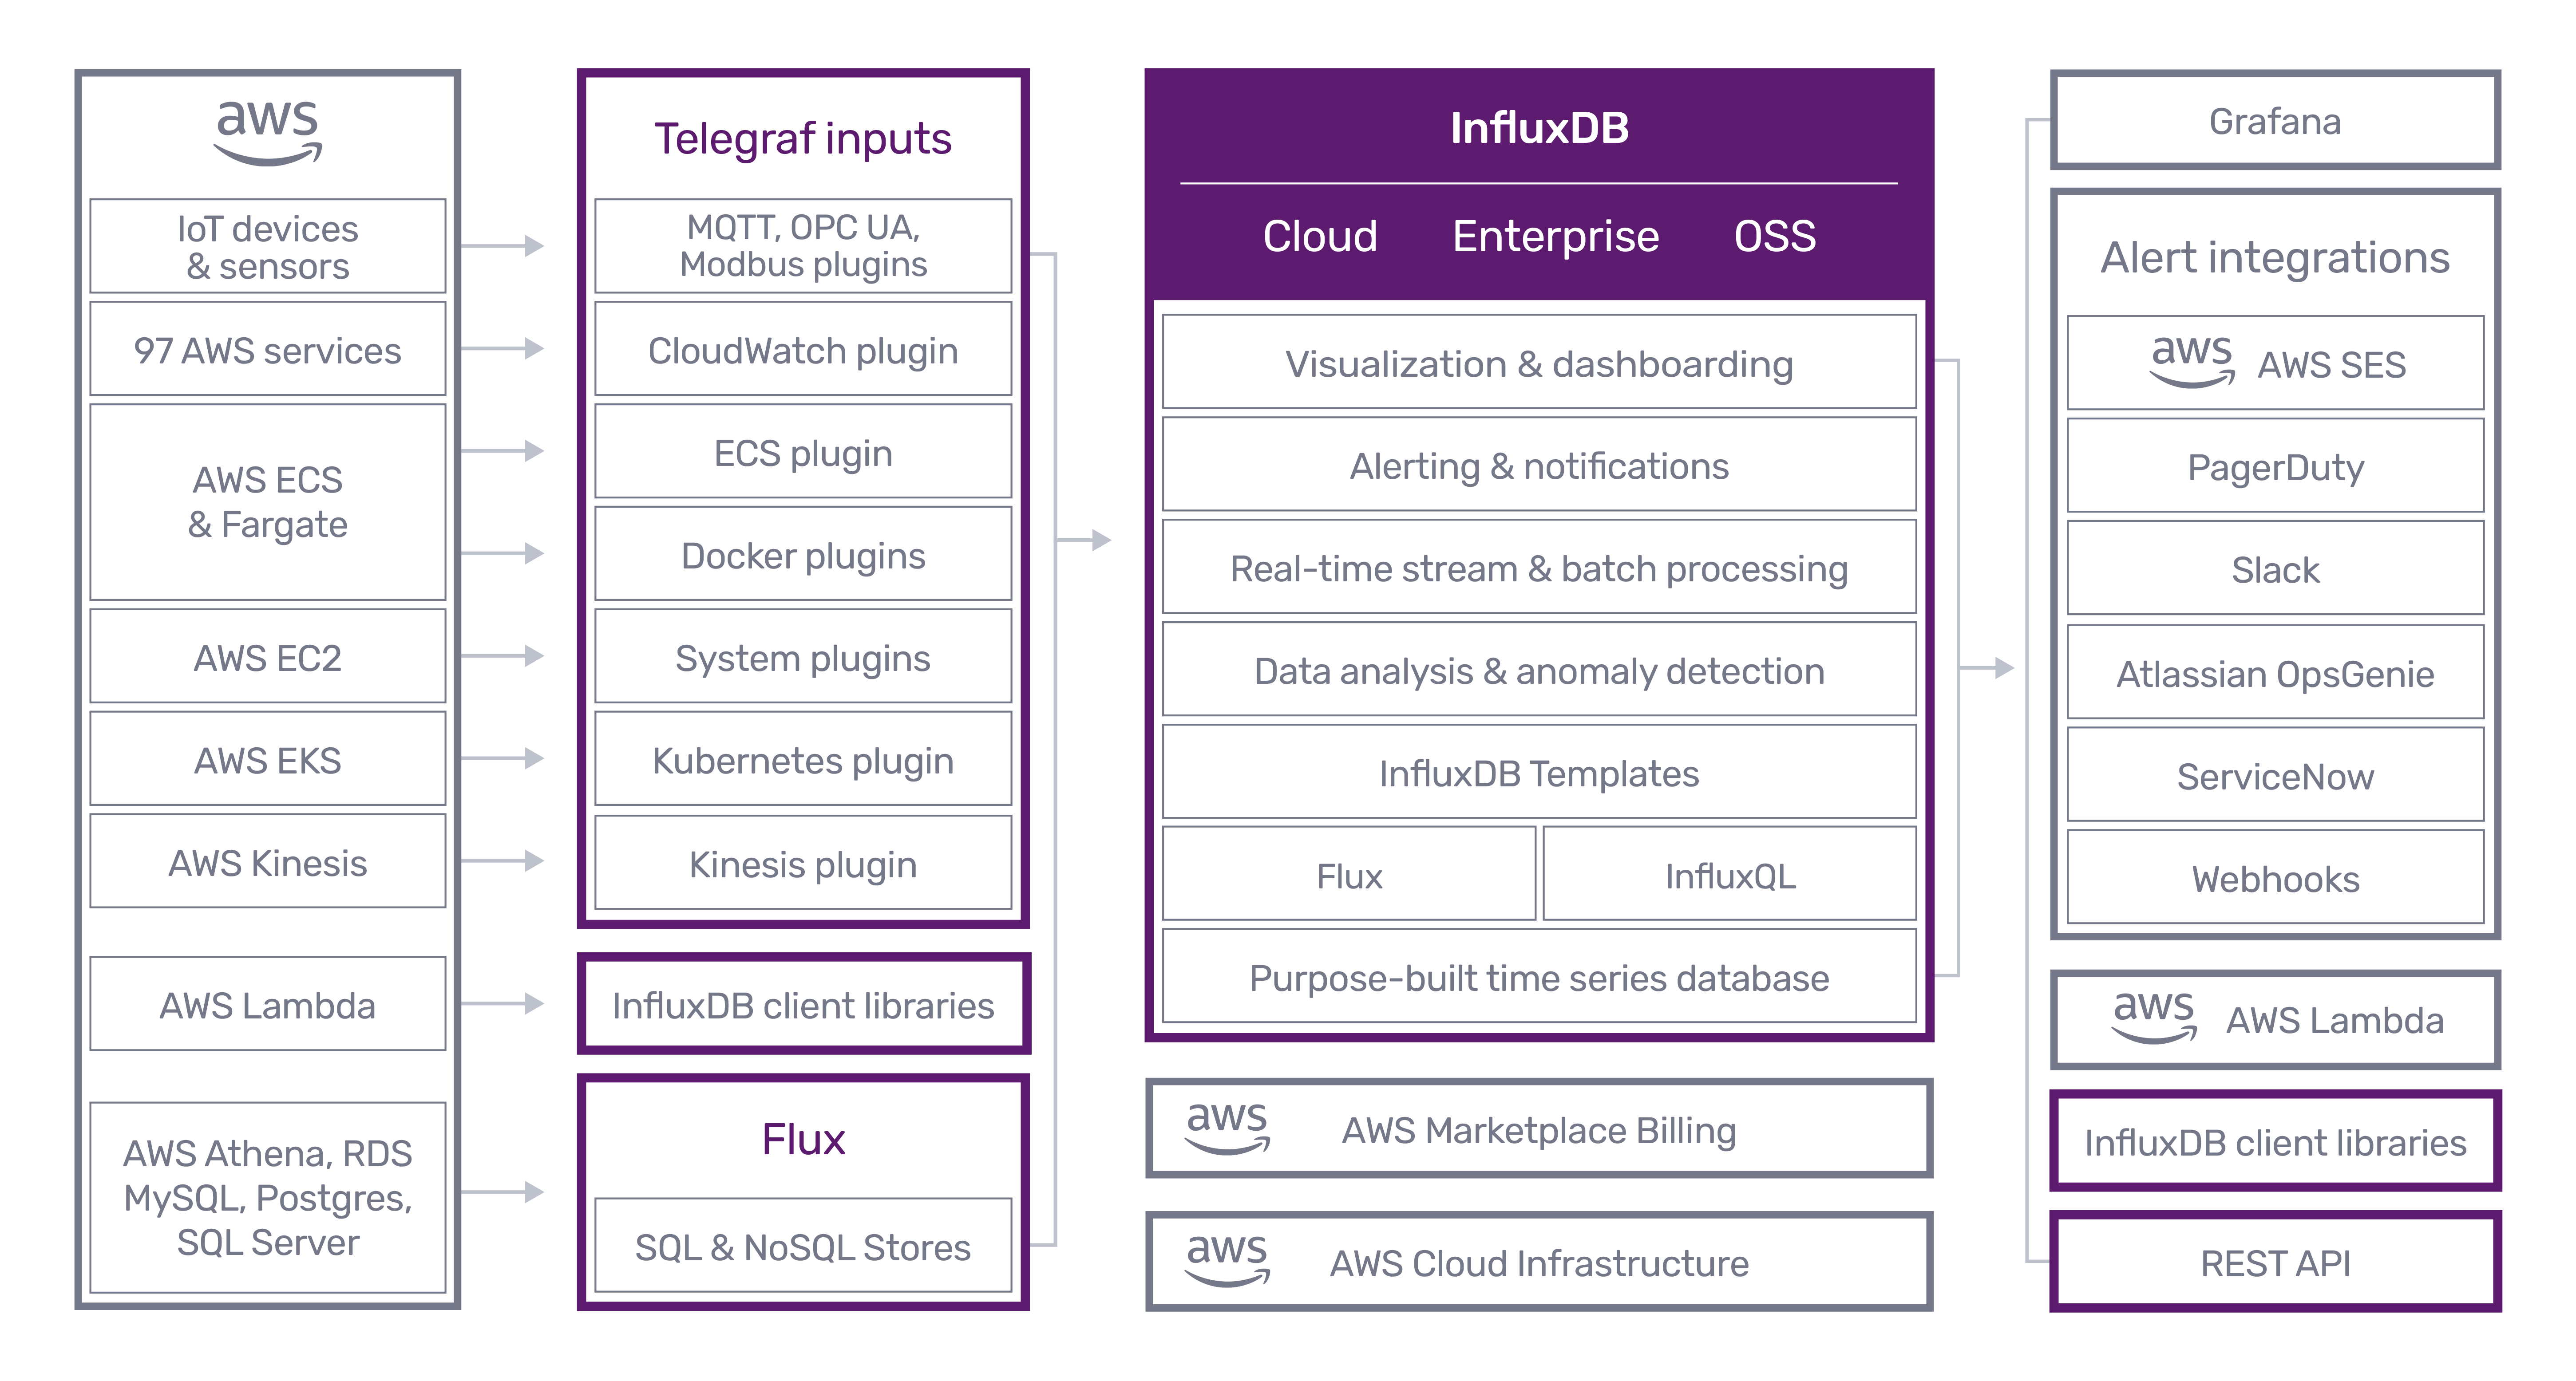 InfluxDB has a wide range of integration points with AWS